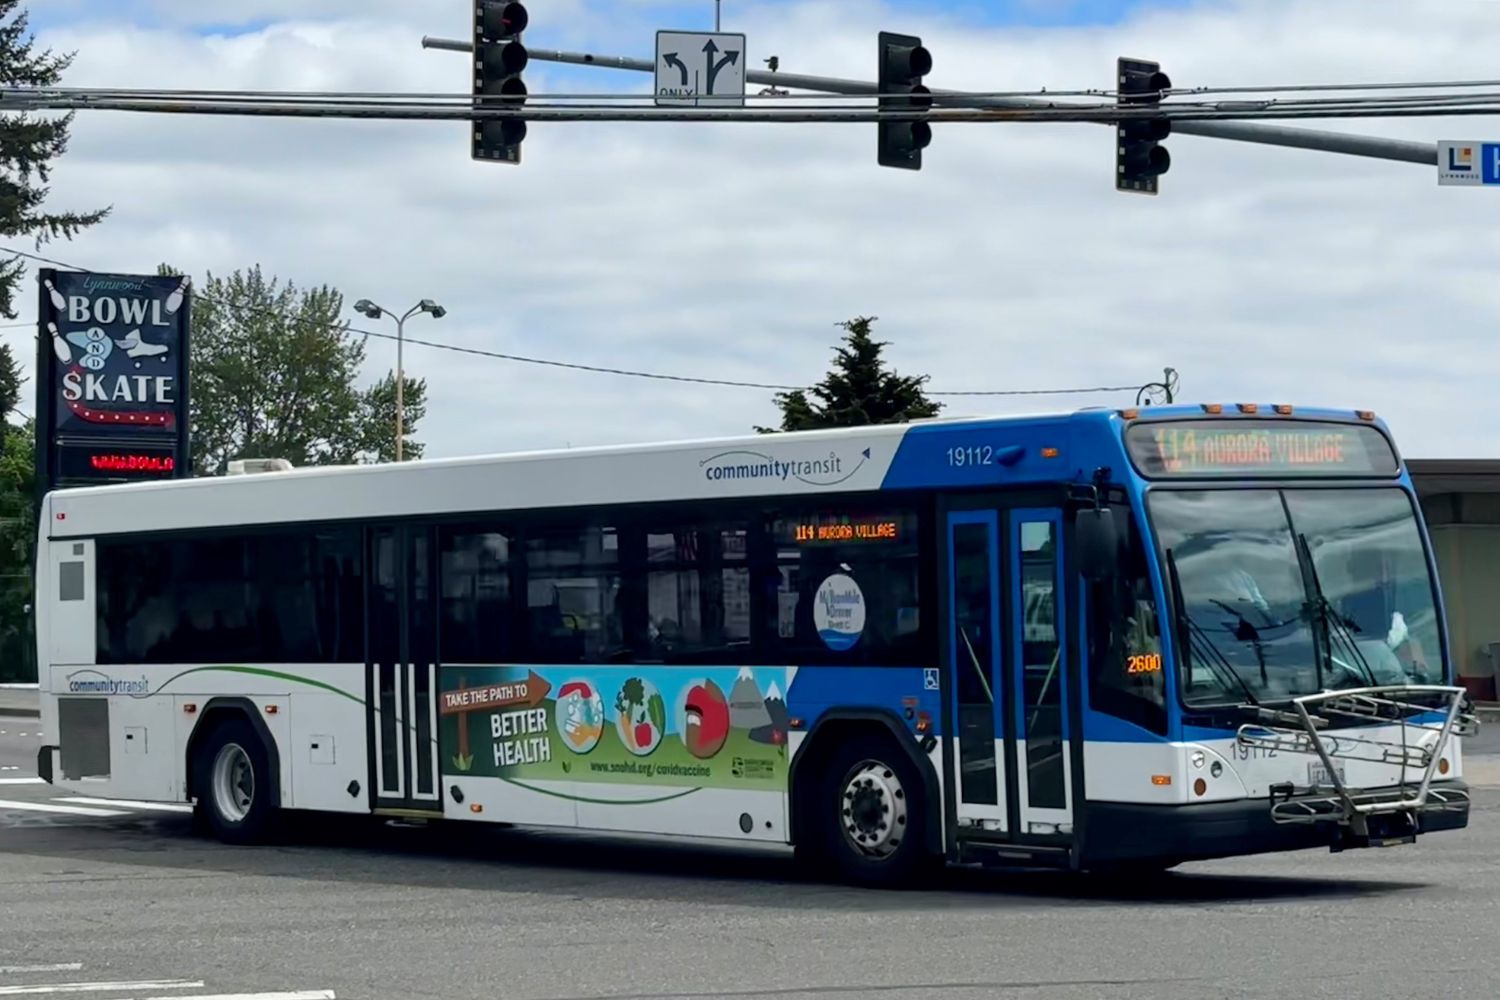 Community Transit's route 114 passes in front of the Bowl and Skate in Lynnwood.